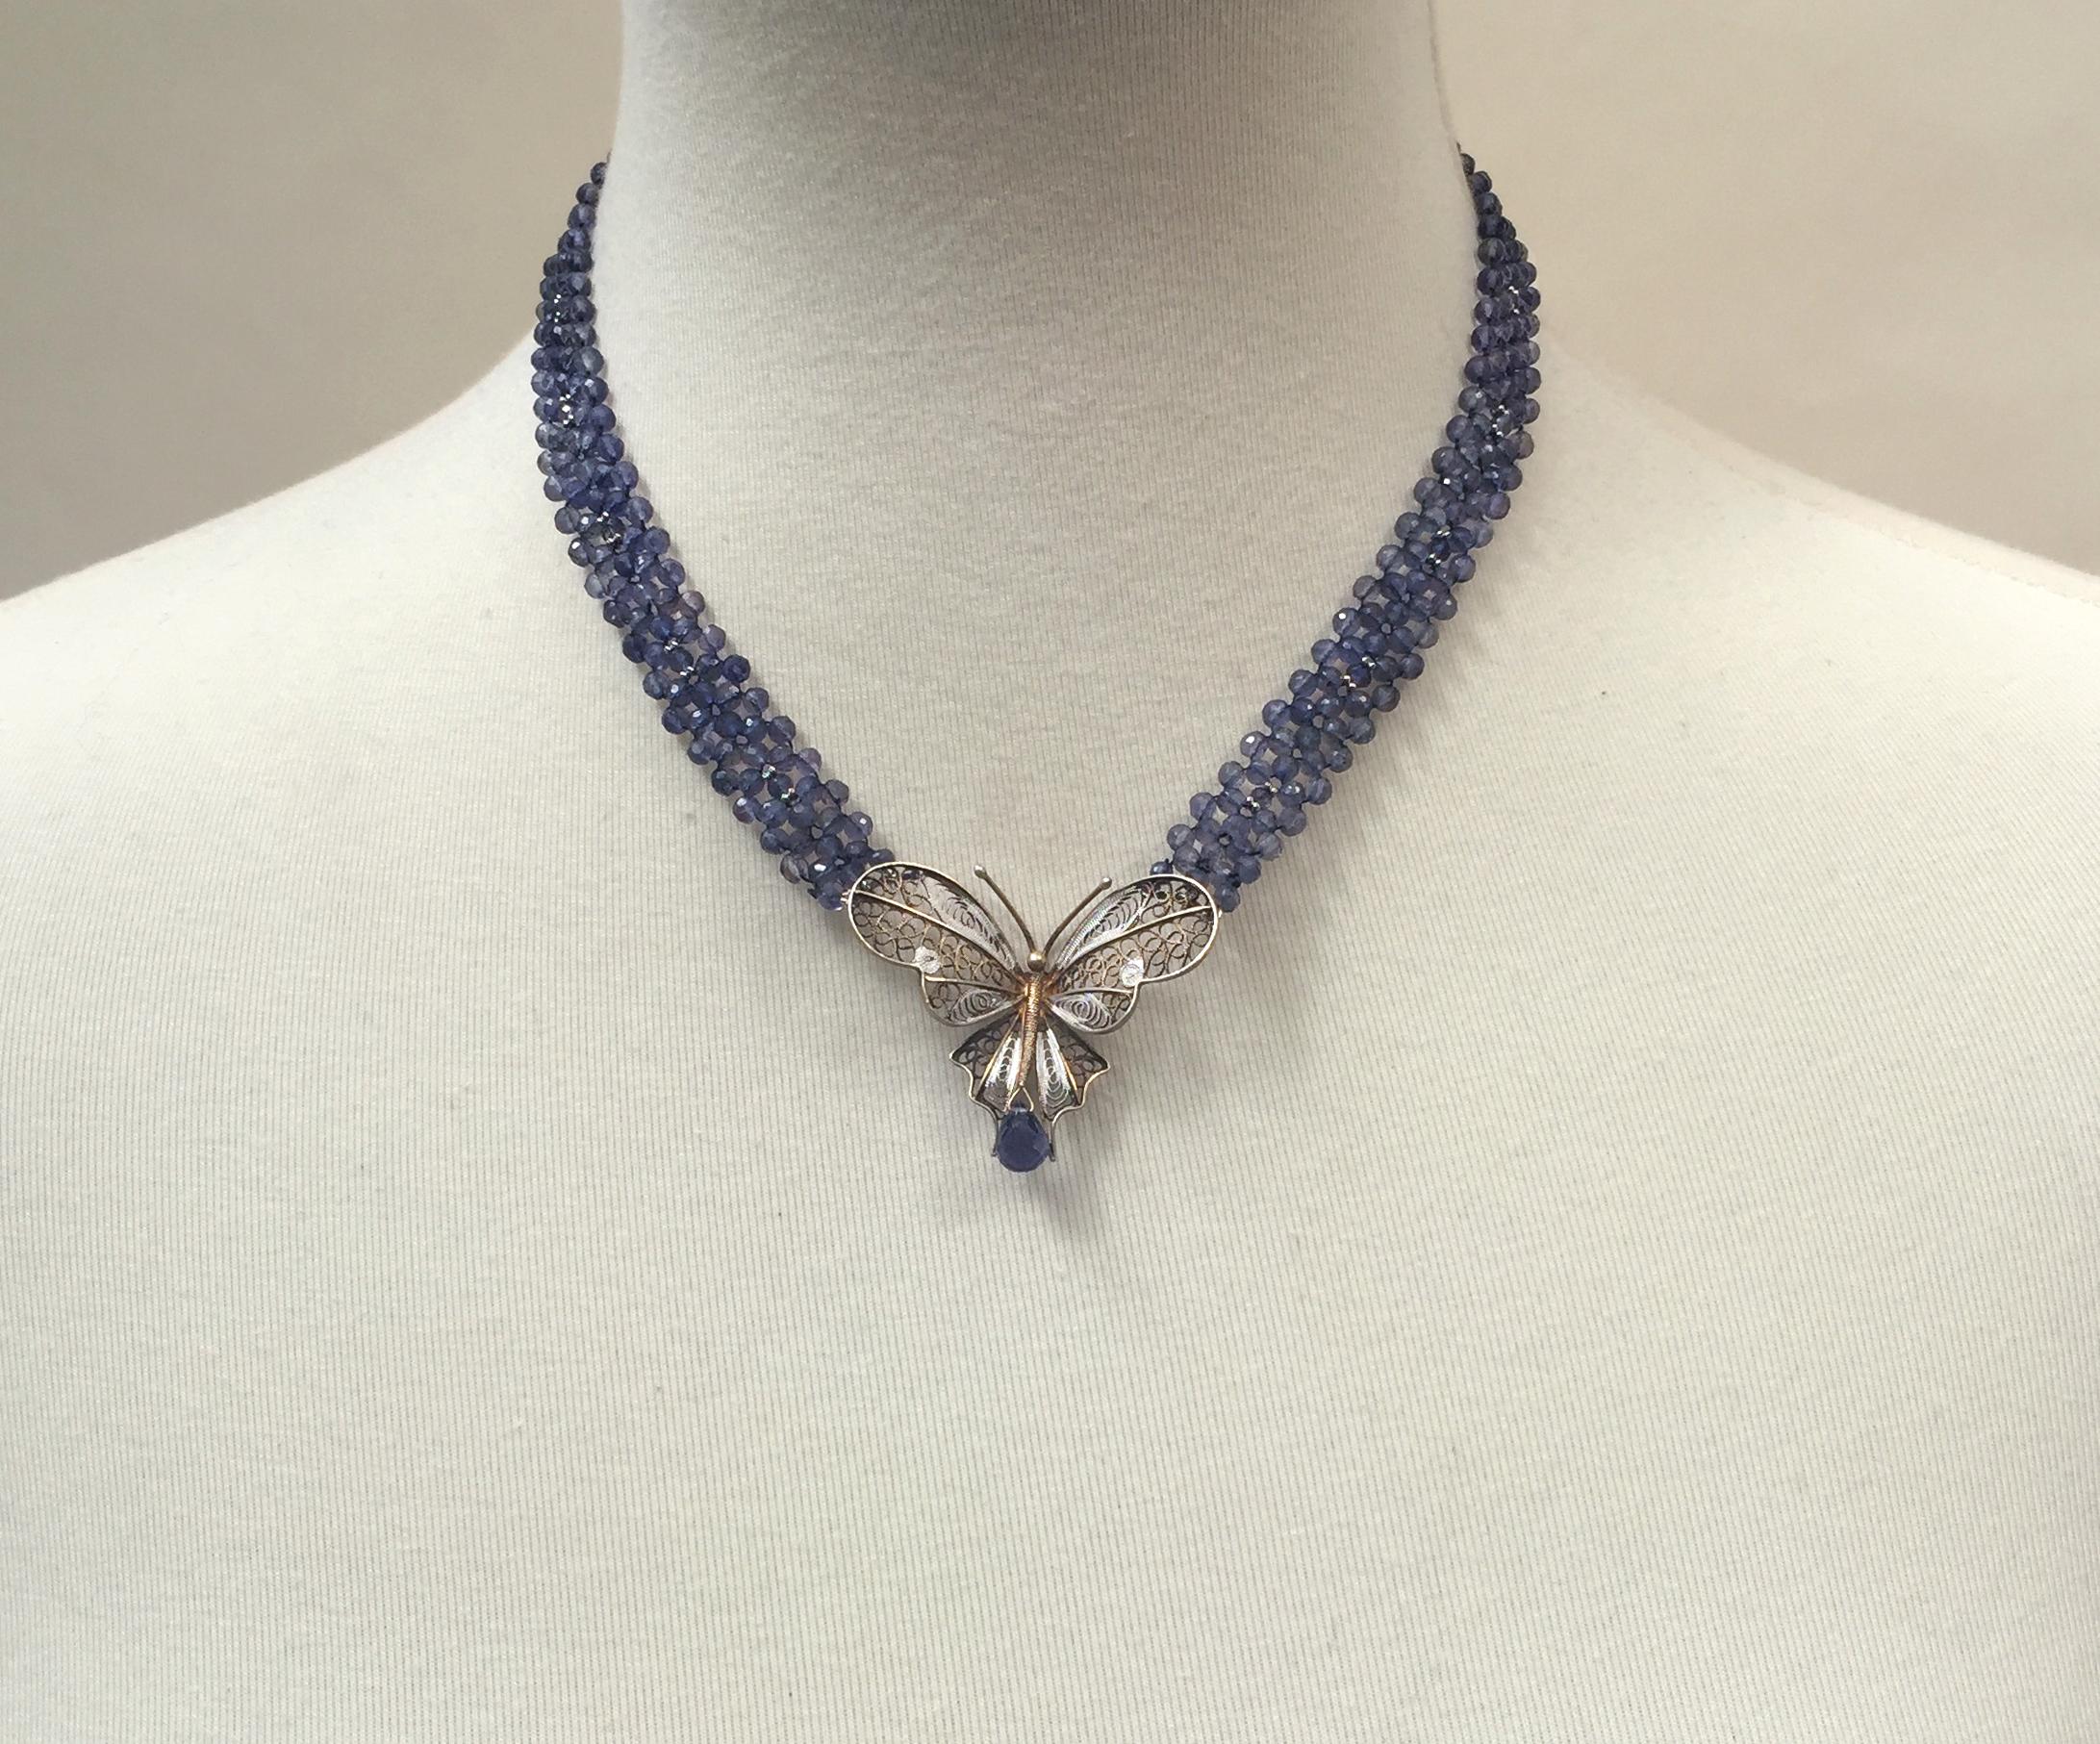 Marina J. Vintage Butterfly on Woven Iolite Beaded Necklace with 14k White Gold 2